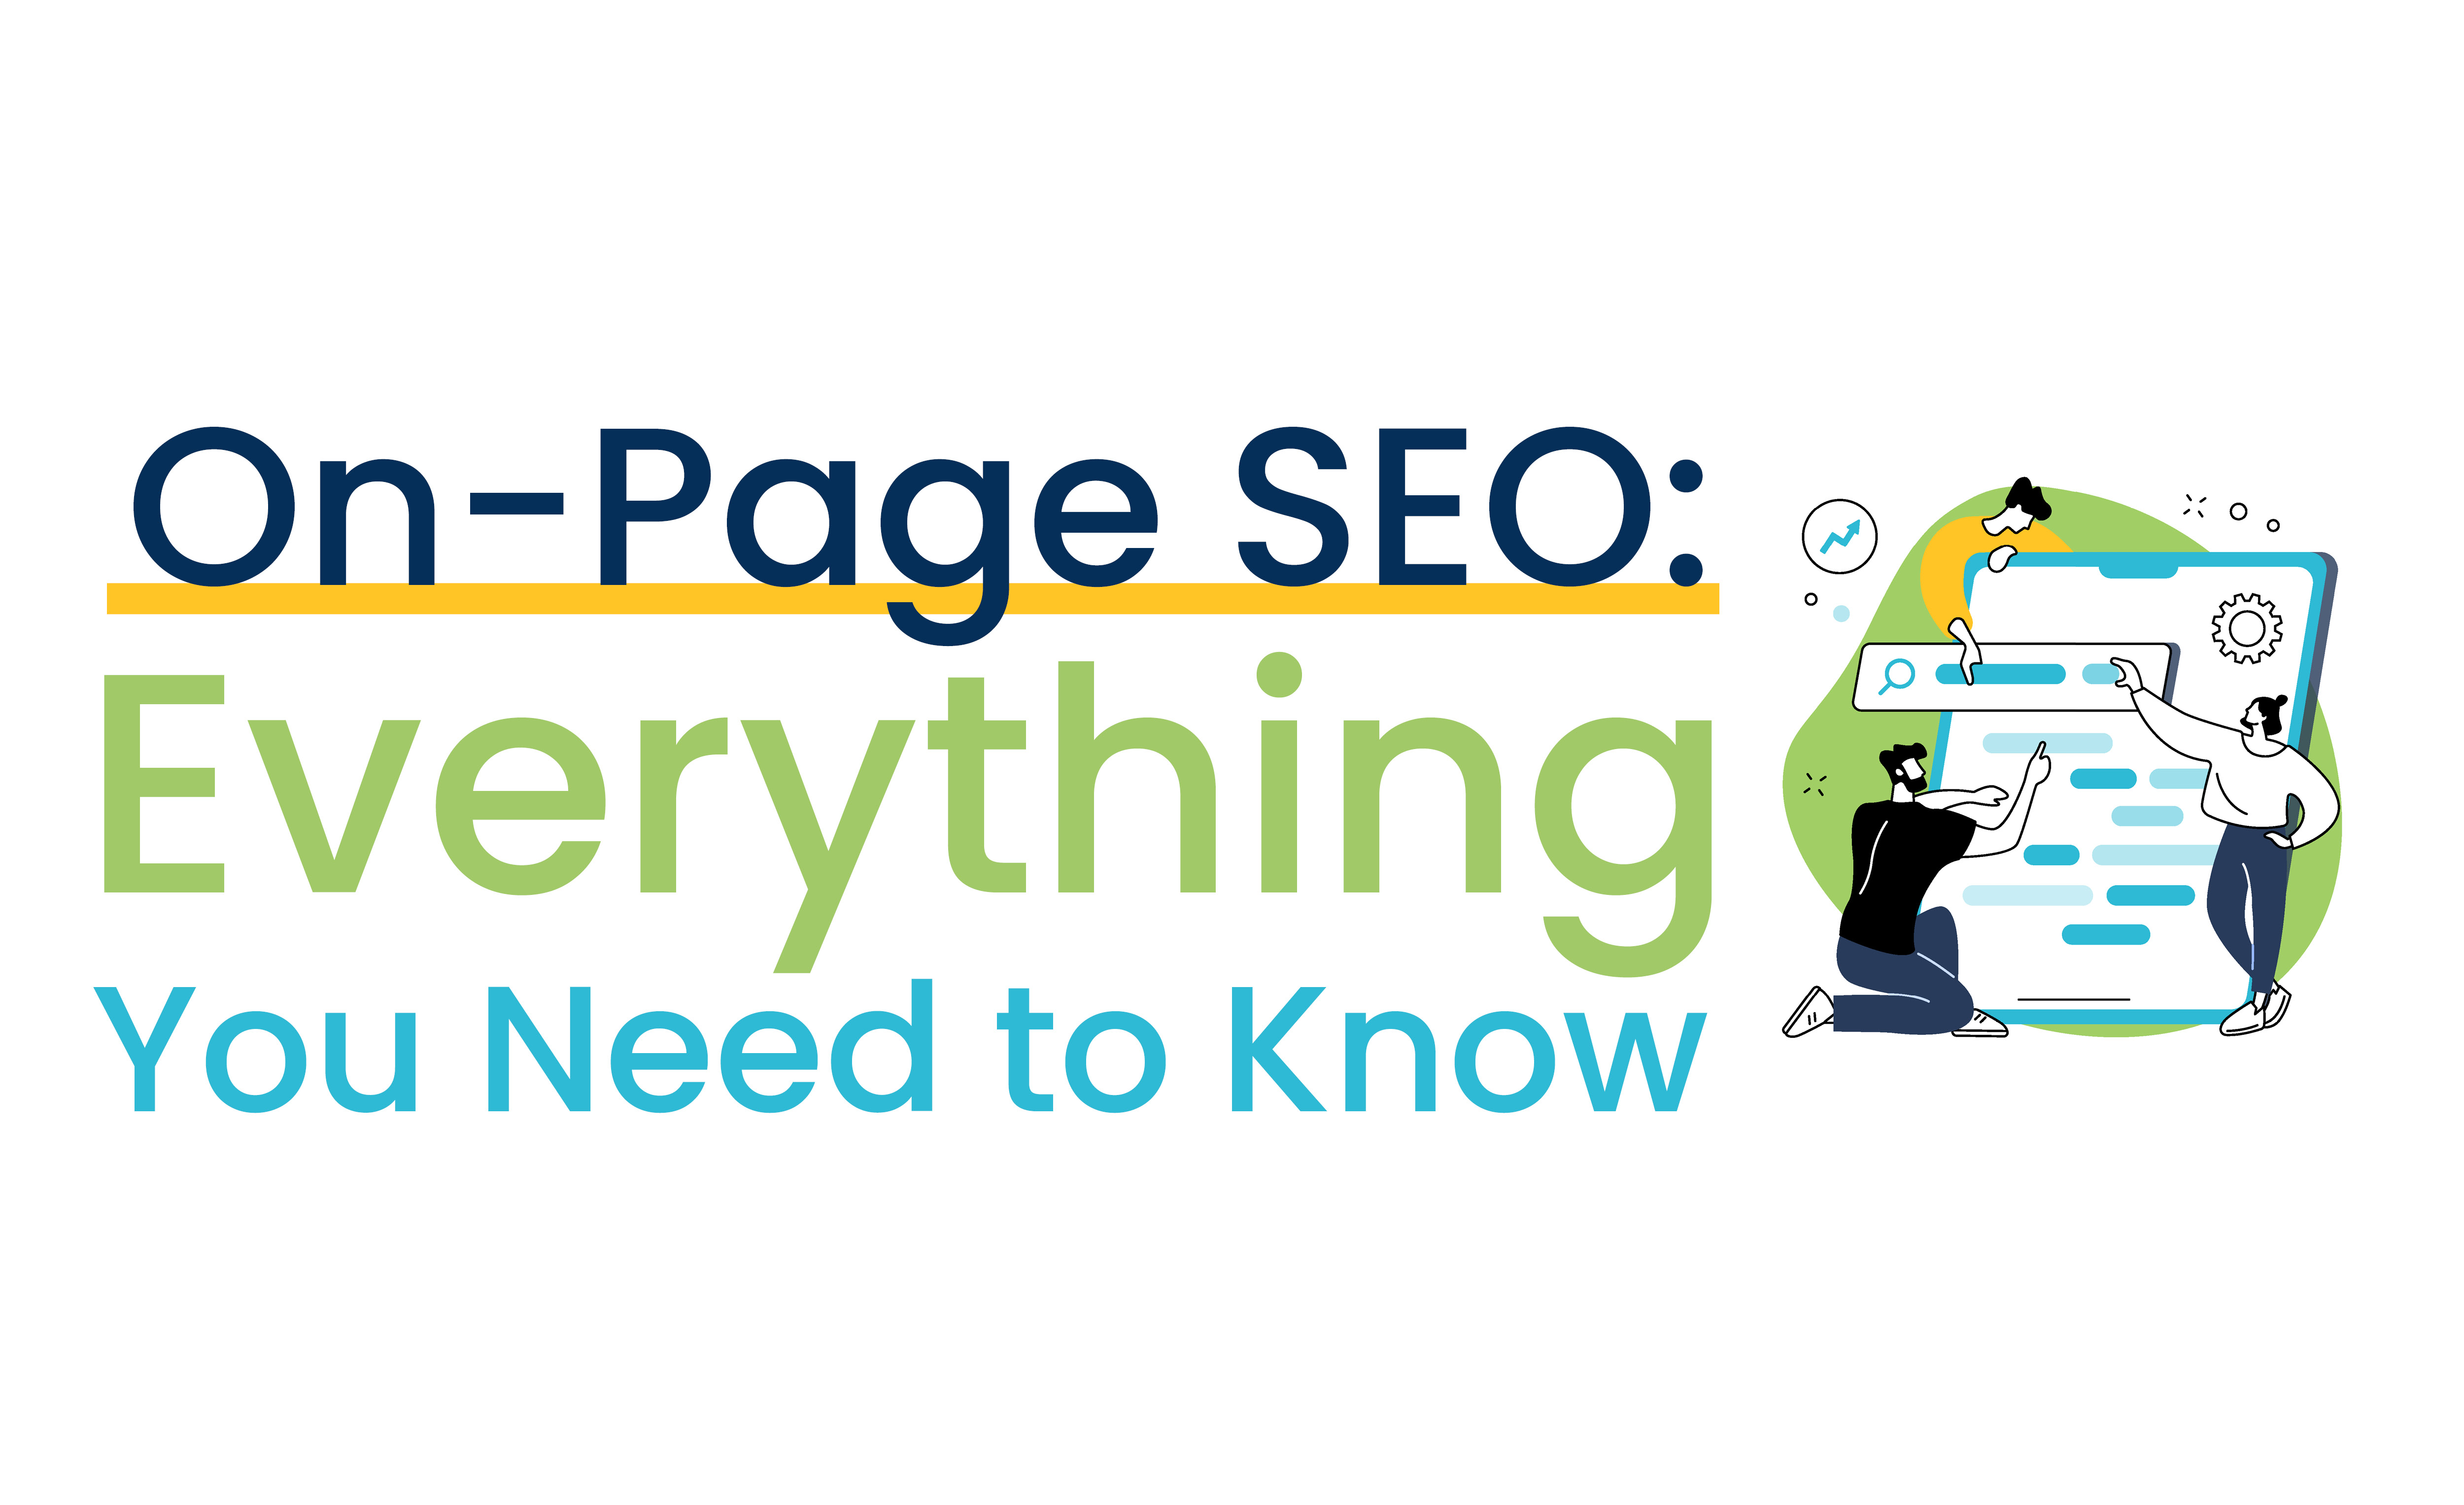 On-Page SEO: Everything You Need to Know